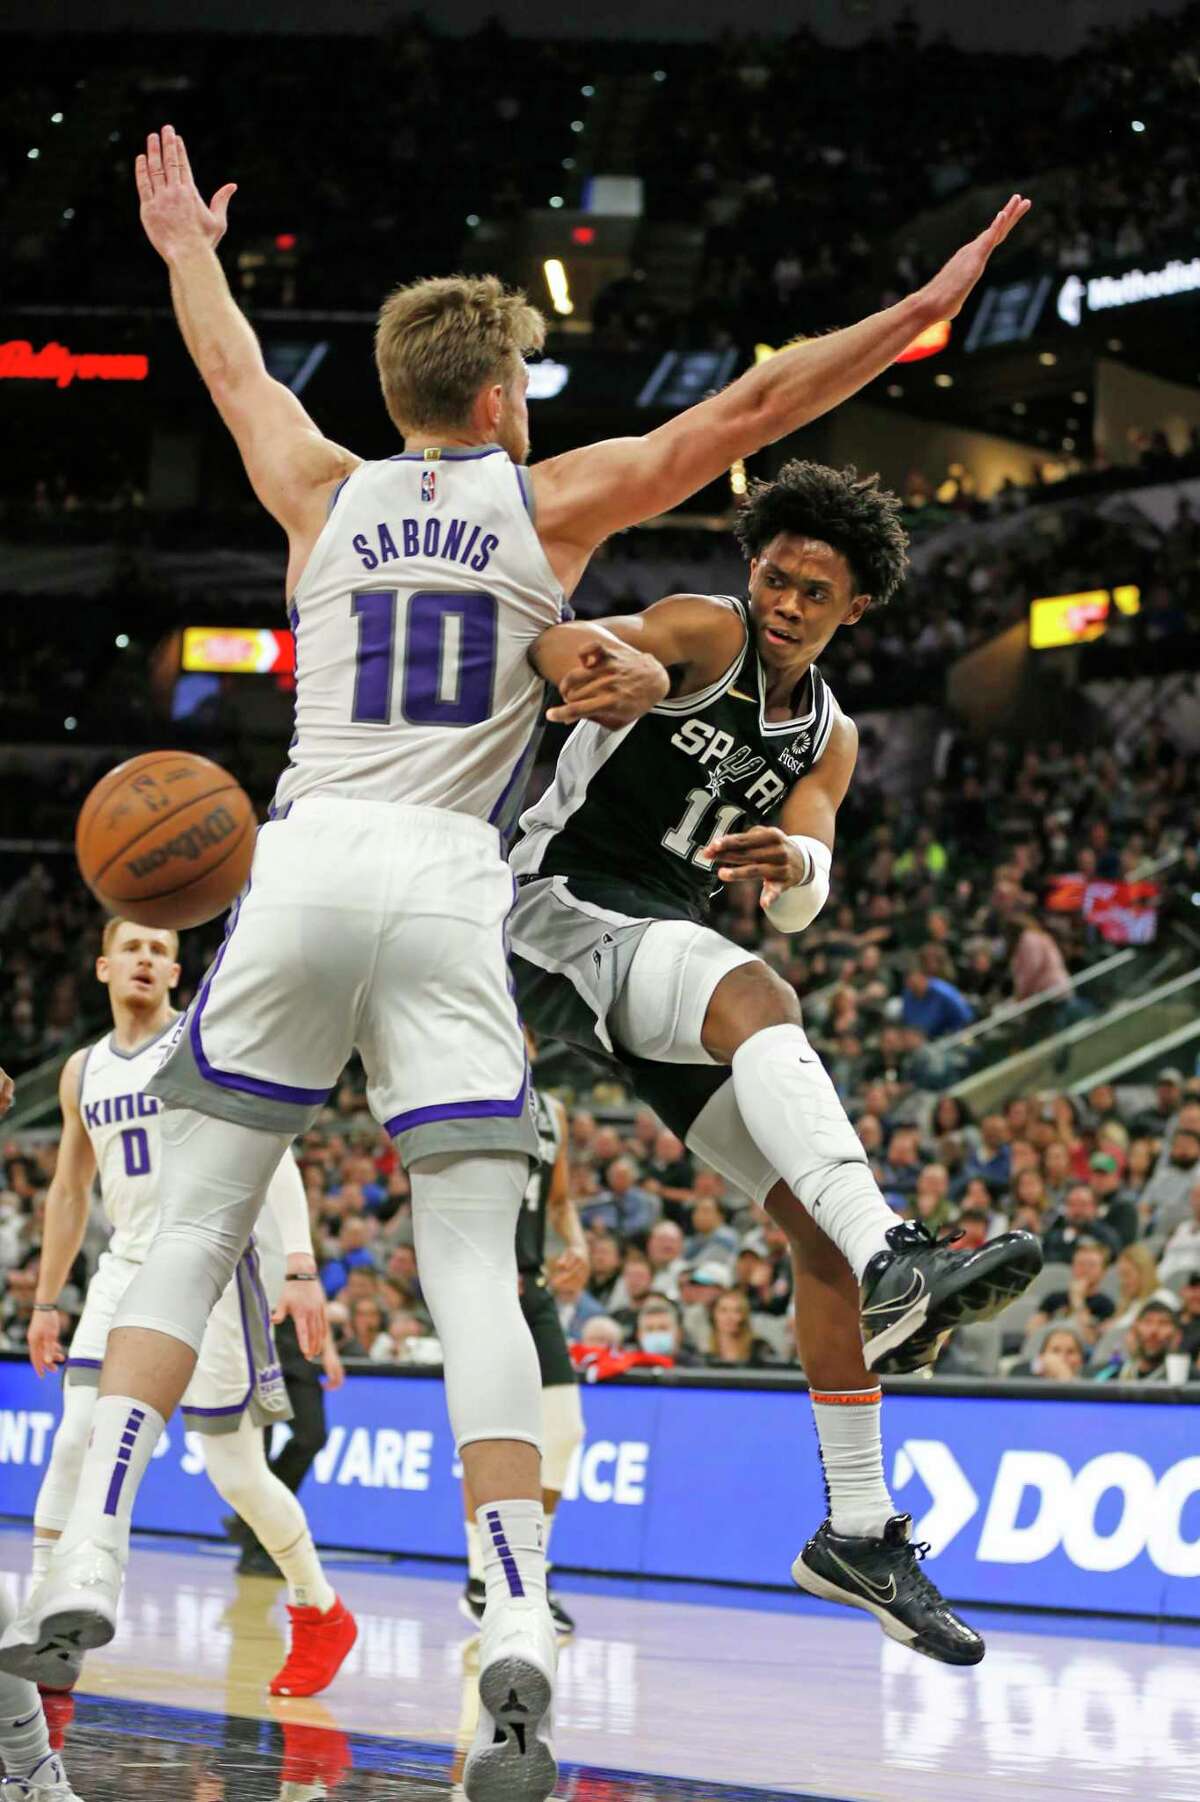 SAN ANTONIO, TX - MARCH 3: Josh Primo #11 of the San Antonio Spurs passes off in front of Domantas Sabonis #10 of the Sacramento Kings in the second half at AT&T Center on March 3, 2022 in San Antonio, Texas. NOTE TO USER: User expressly acknowledges and agrees that, by downloading and or using this photograph, User is consenting to terms and conditions of the Getty Images License Agreement. (Photo by Ronald Cortes/Getty Images)